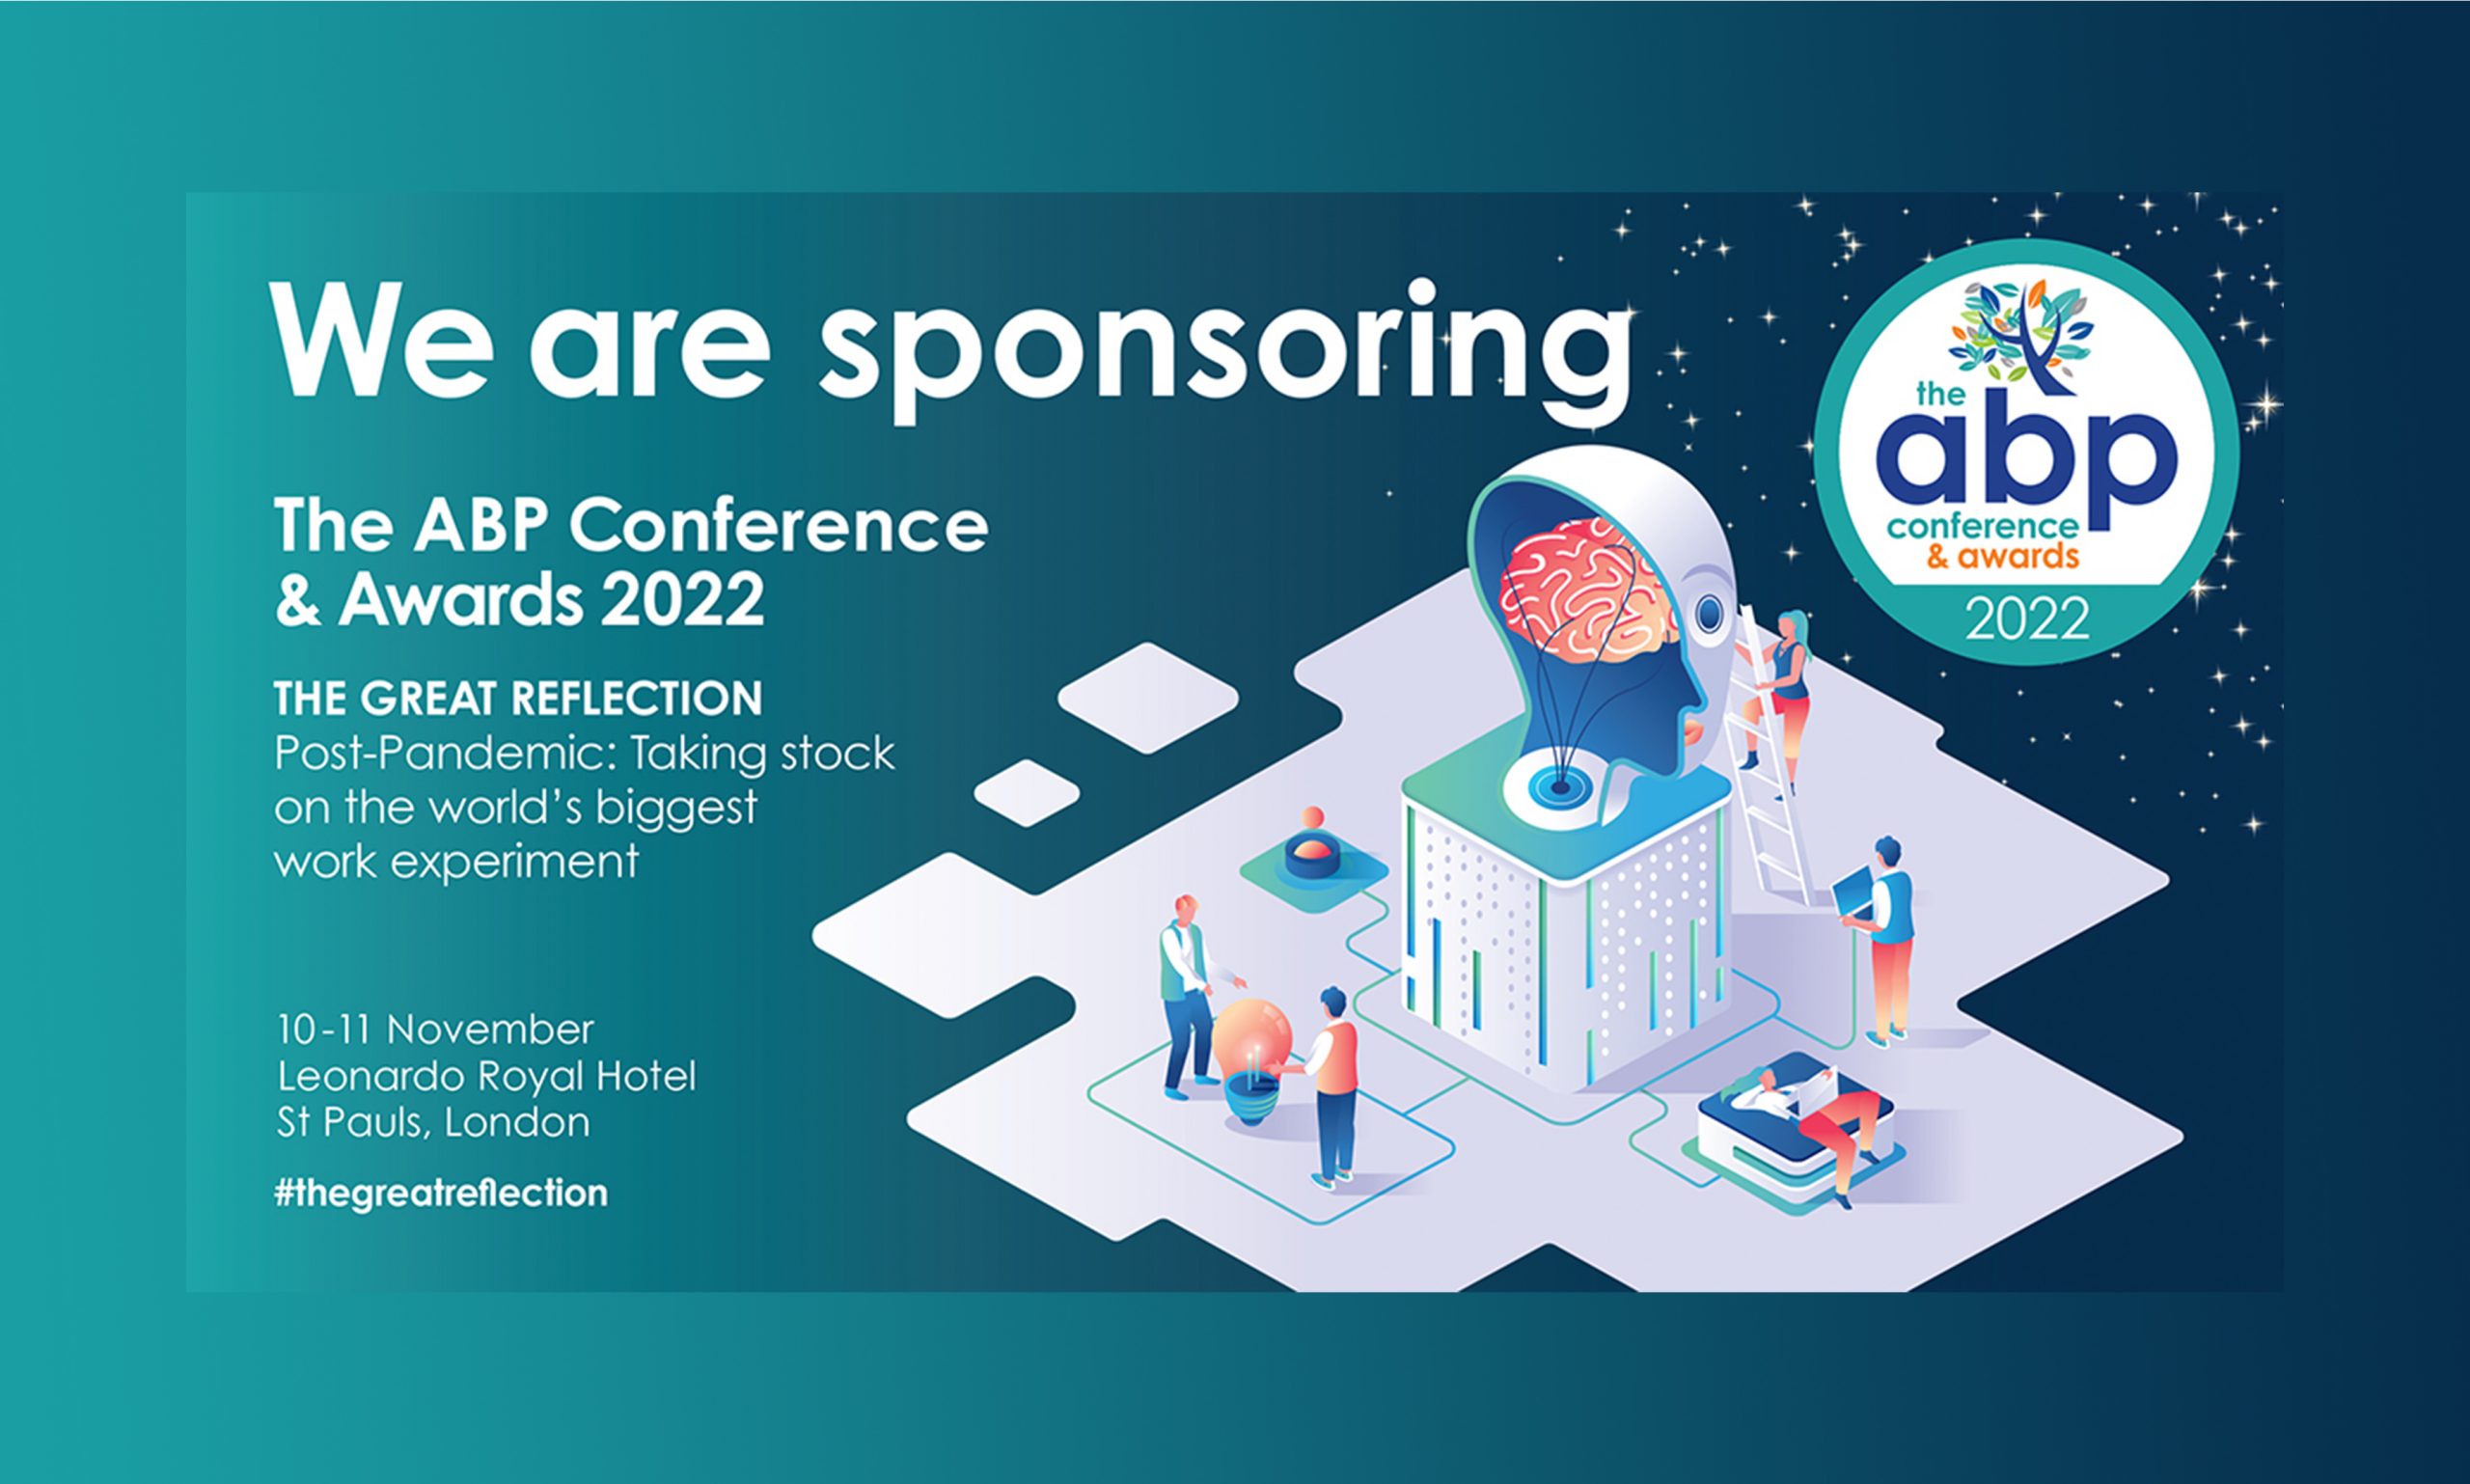 The ABP Conference and Awards 2022